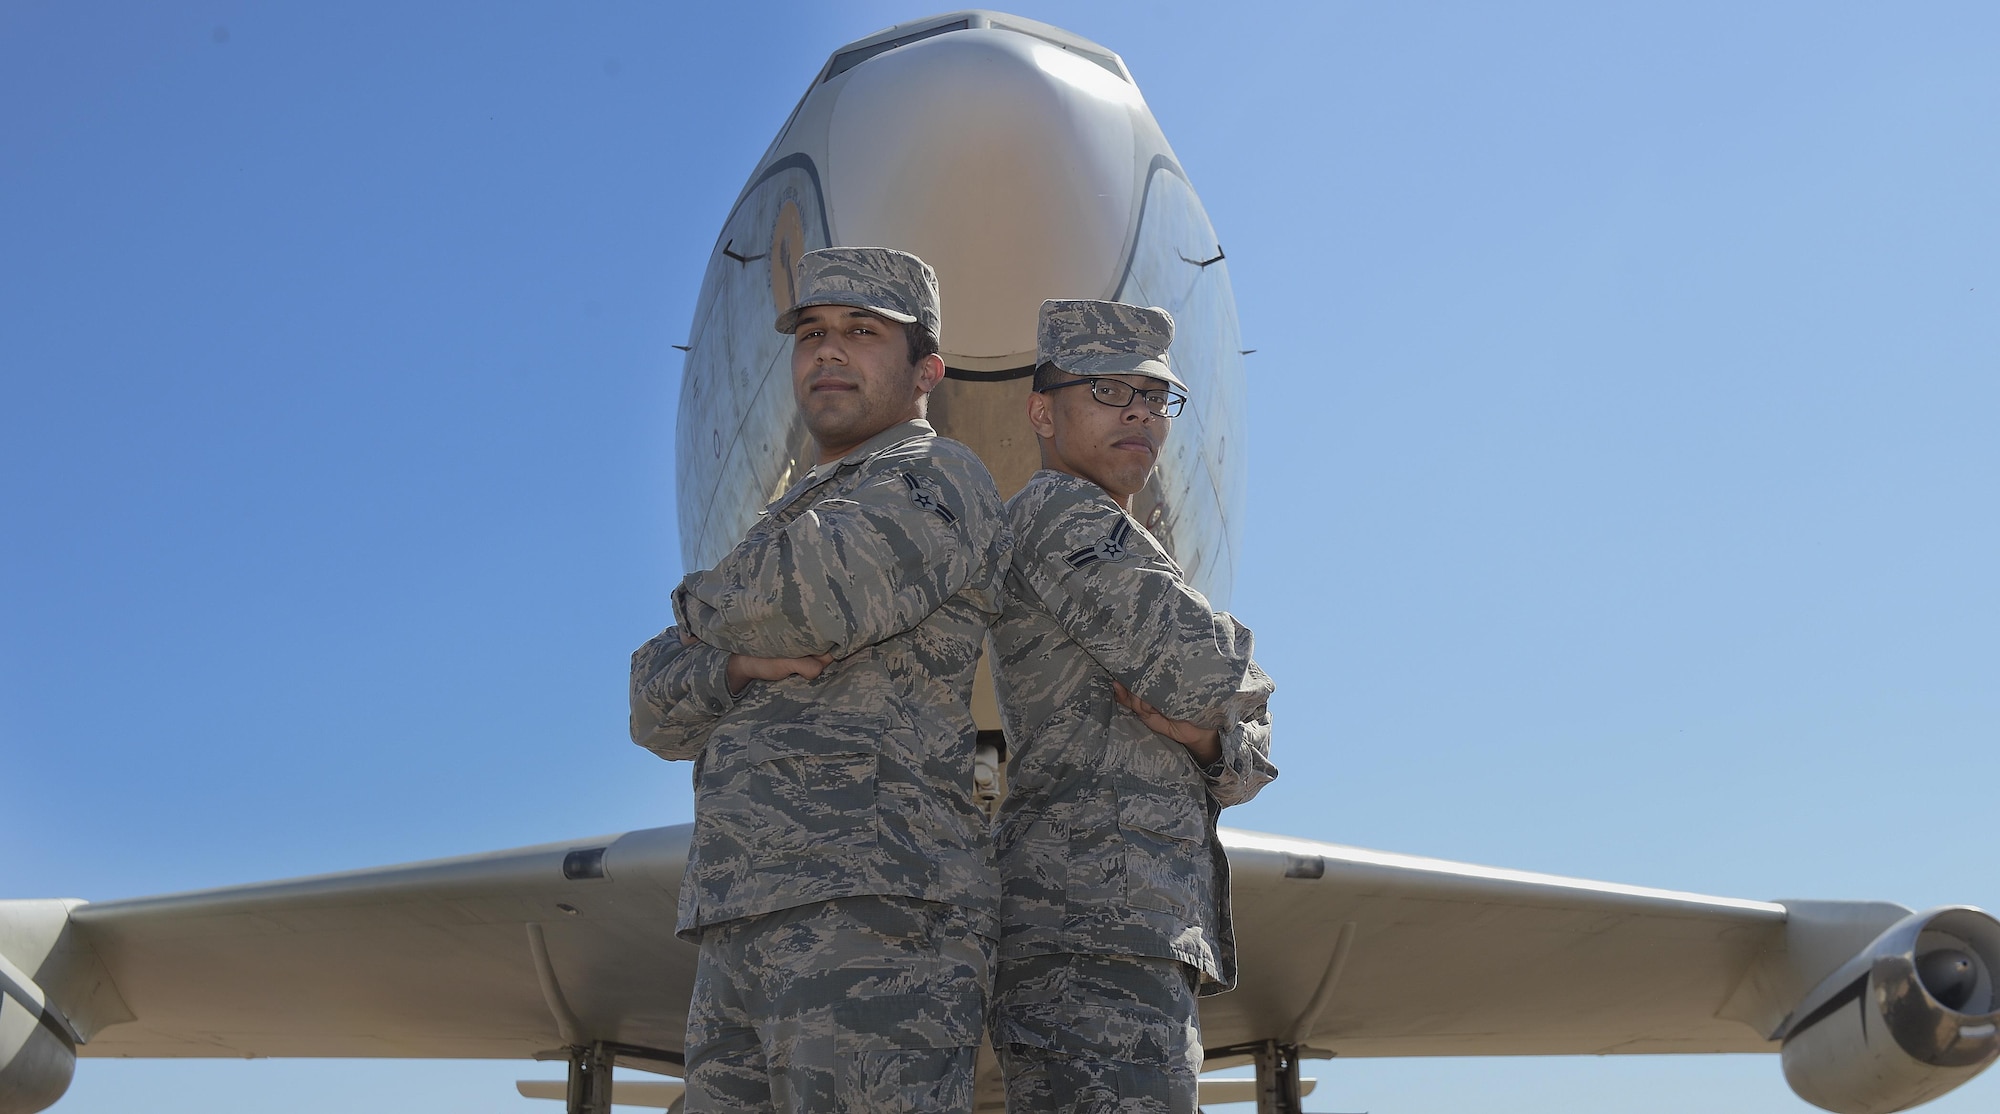 Airman 1st Class James Escobar (left) and Airman 1st Class Naxiel Nunez pose in front of a KC-135 Stratotanker March 11, 2015, on McConnell Air Force Base, Kan. Escobar and Nunez responded to a car crash outside McConnell AFB Feb. 28, 2015, helping save the victim’s life. Escobar is a 22nd Comptroller Squadron financial management technician and Nunez is a 22nd Medical Support Squadron outpatient records technician. (U.S. Air Force photo/Senior Airman Colby L. Hardin)